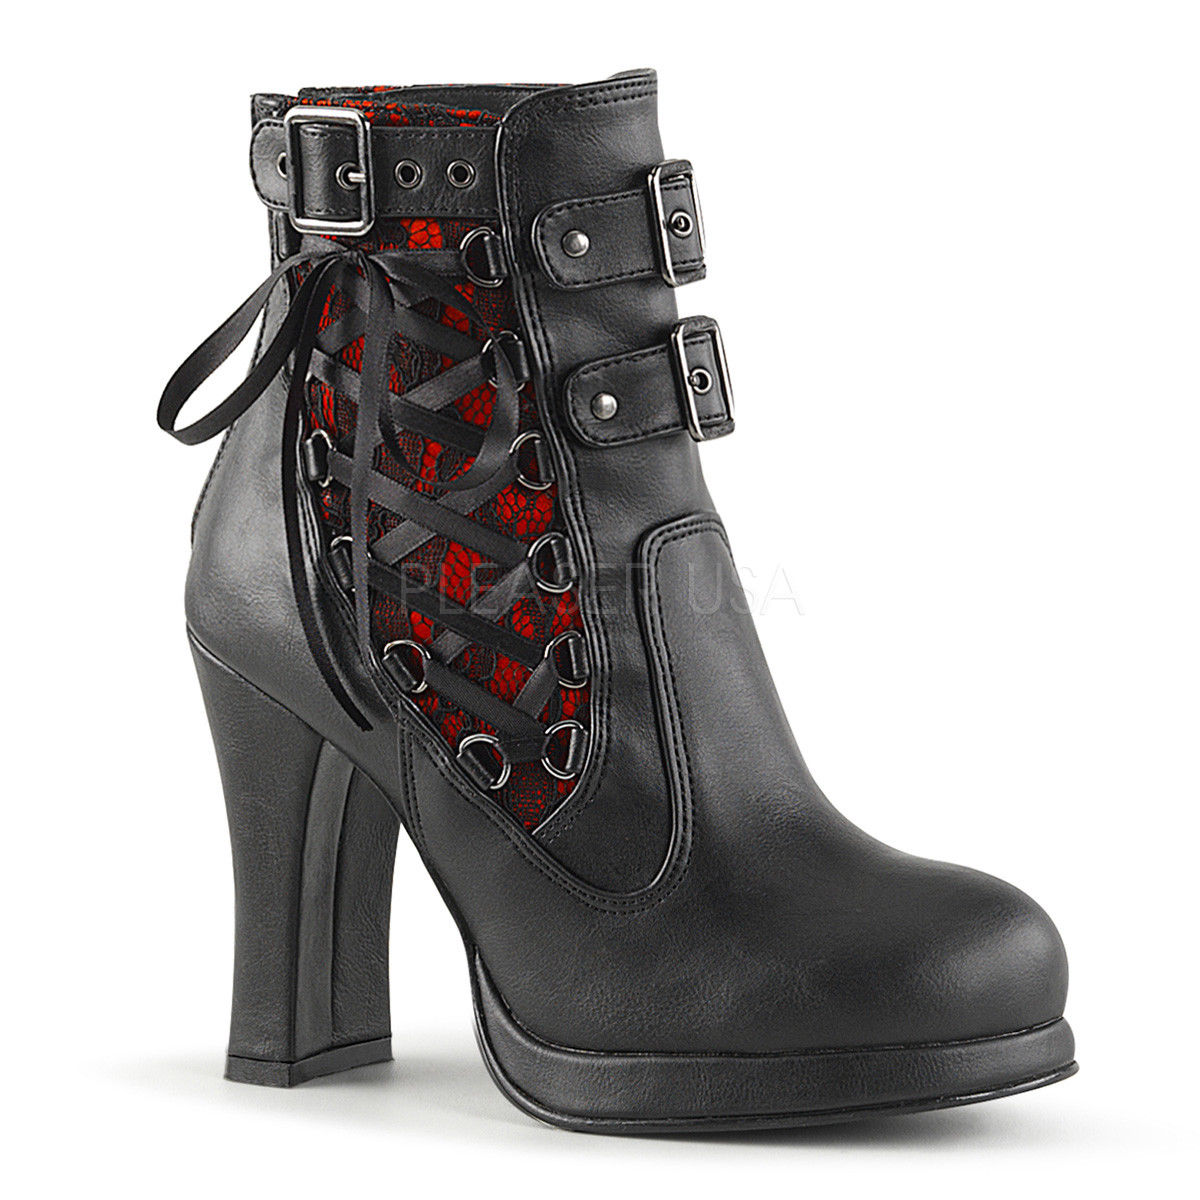 DEMONIA Crypto-51 Black Red Lace Overlay Corset Laces Goth Ankle Boots 4" Heels - A Shoe Addiction